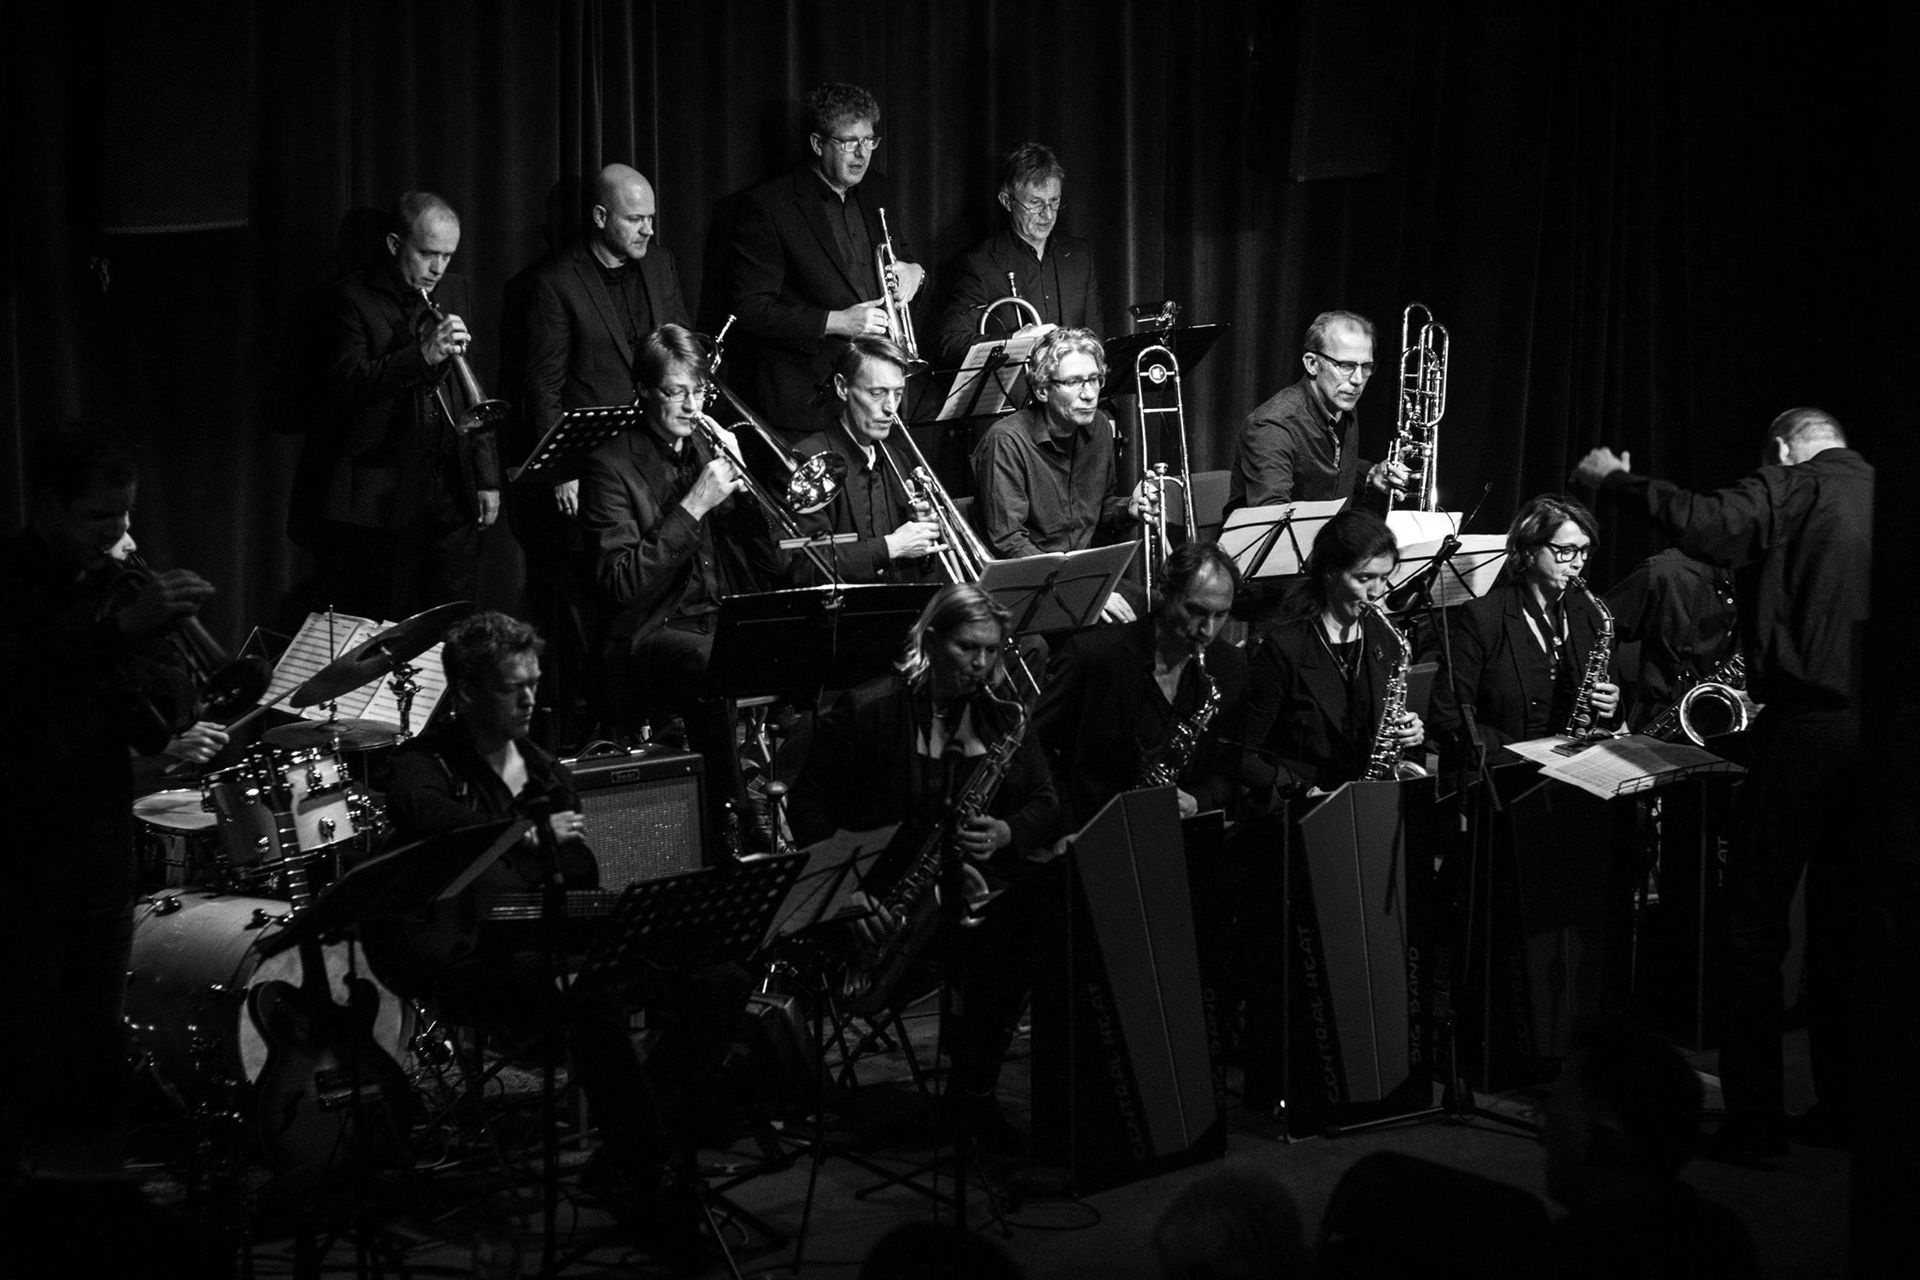 The Central Heat Big Band